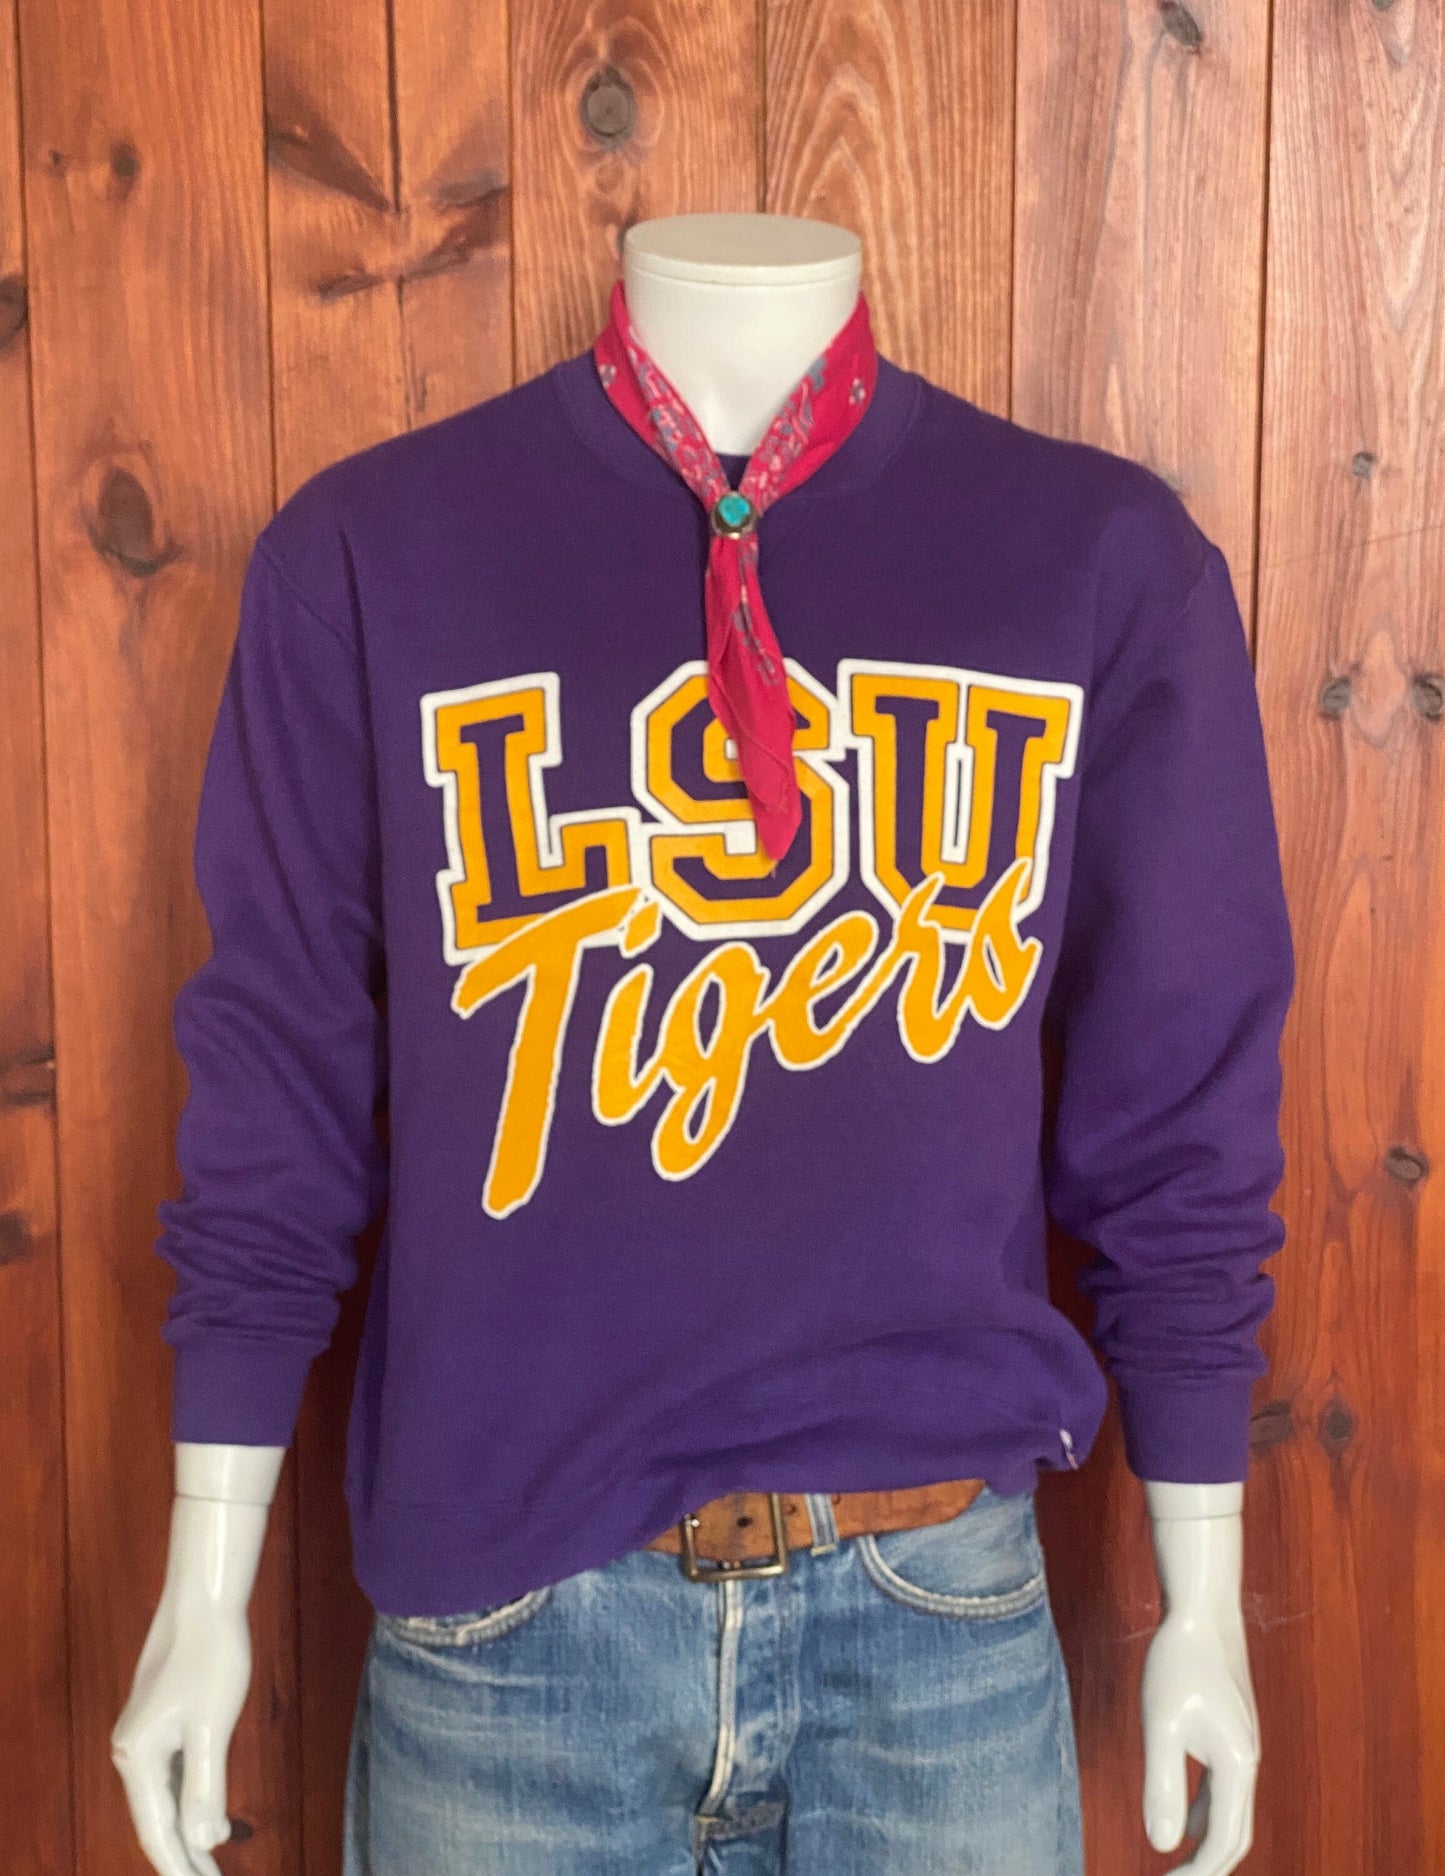 Size: Large. Made In USA LSU Tigers 90s vintage sweatshirt made by Russel Athletic